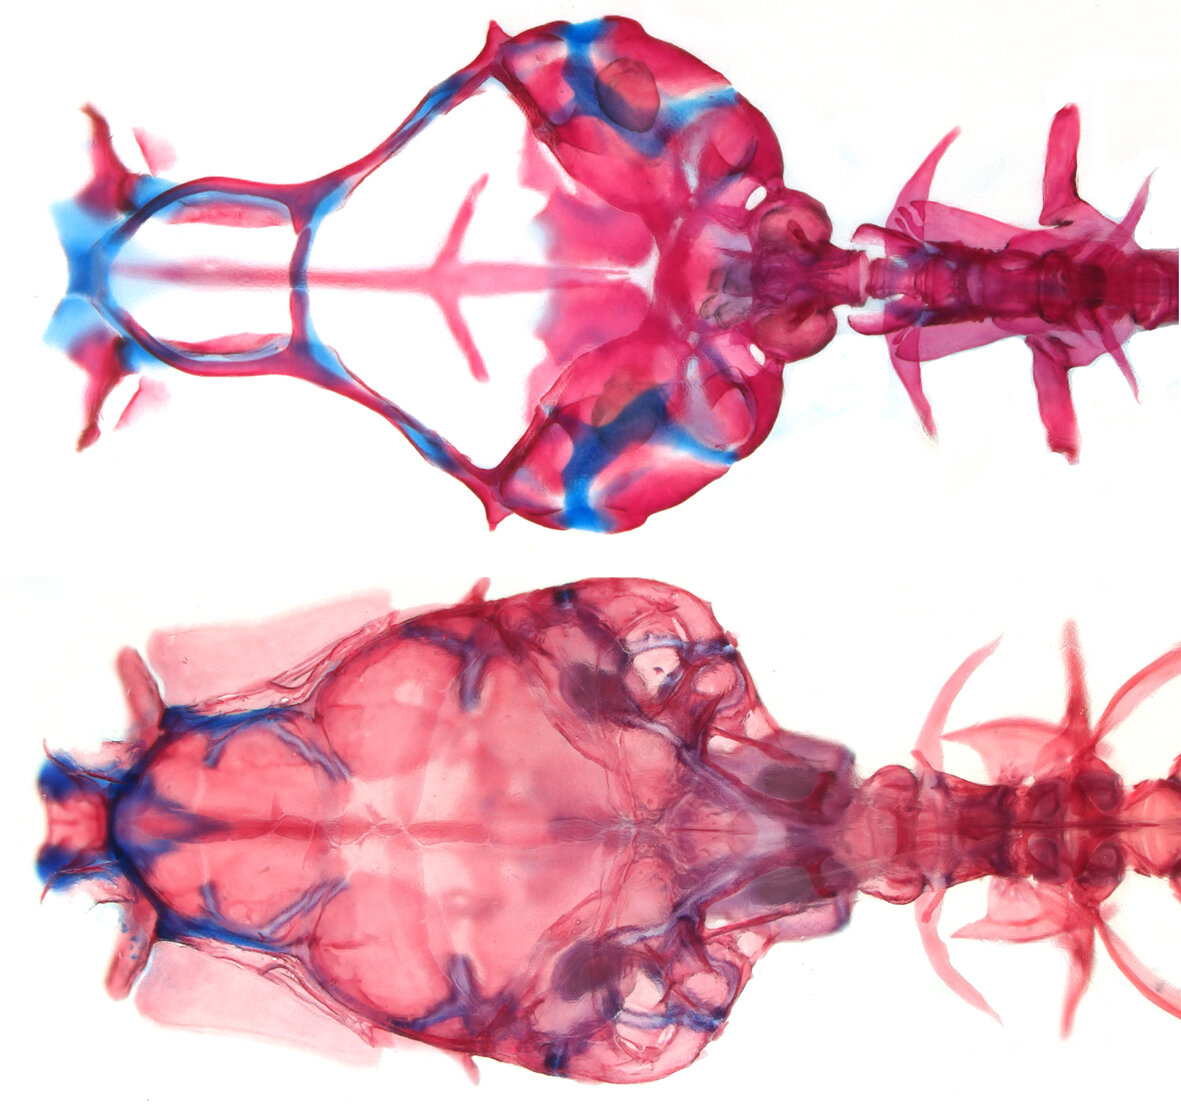 Transparent fish without a skull roof becomes a model organism for  neurophysiology